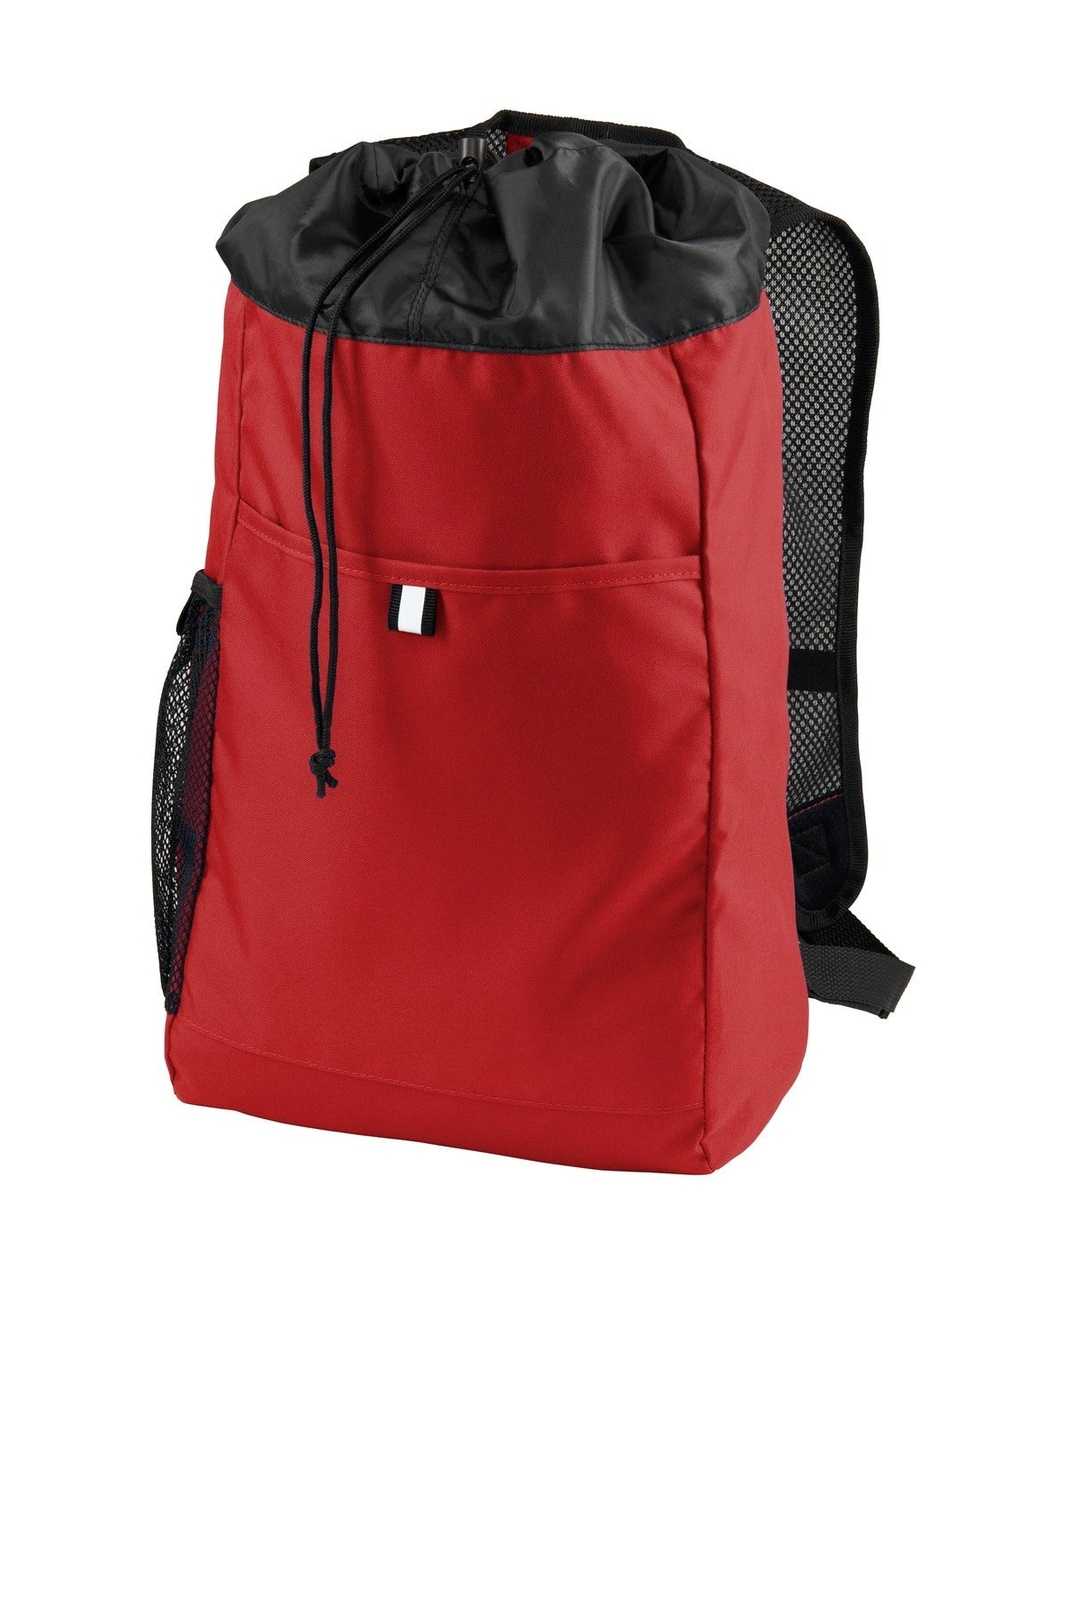 Port Authority BG211 Hybrid Backpack - Chili Red Black - HIT a Double - 1